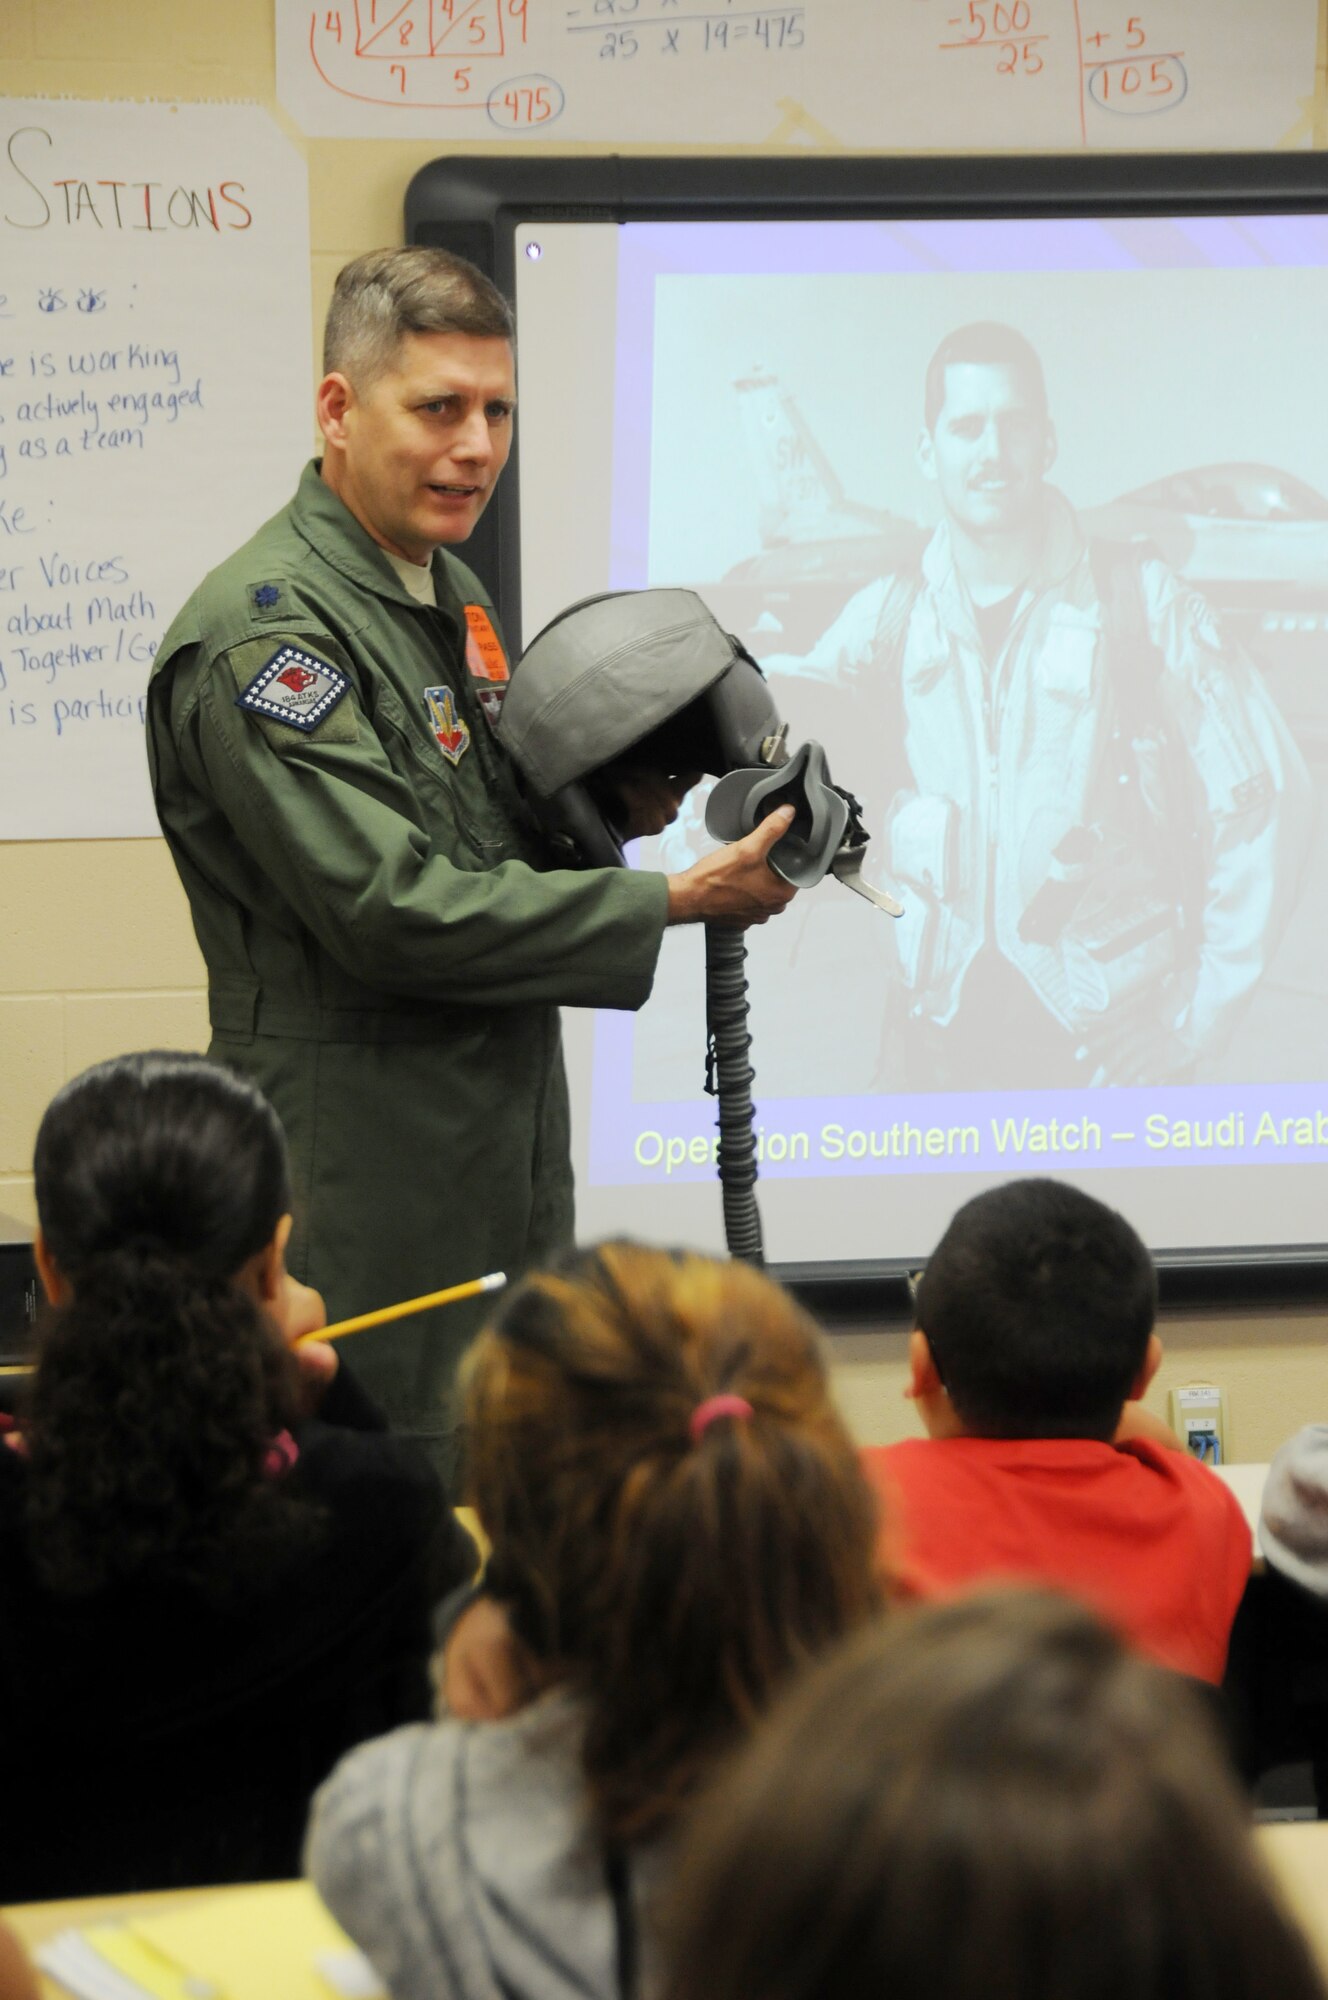 Lt. Col. Toby Brallier, 188th Wing pilot, conducts a presentation on his career as part of the Partners in Education program at Sutton Elementary school in Fort Smith, Ark., Nov. 6, 2014. Brallier is assigned to the 188th Operations Group. (U.S. Air National Guard photo by Airman 1st Class Cody Martin/Released)